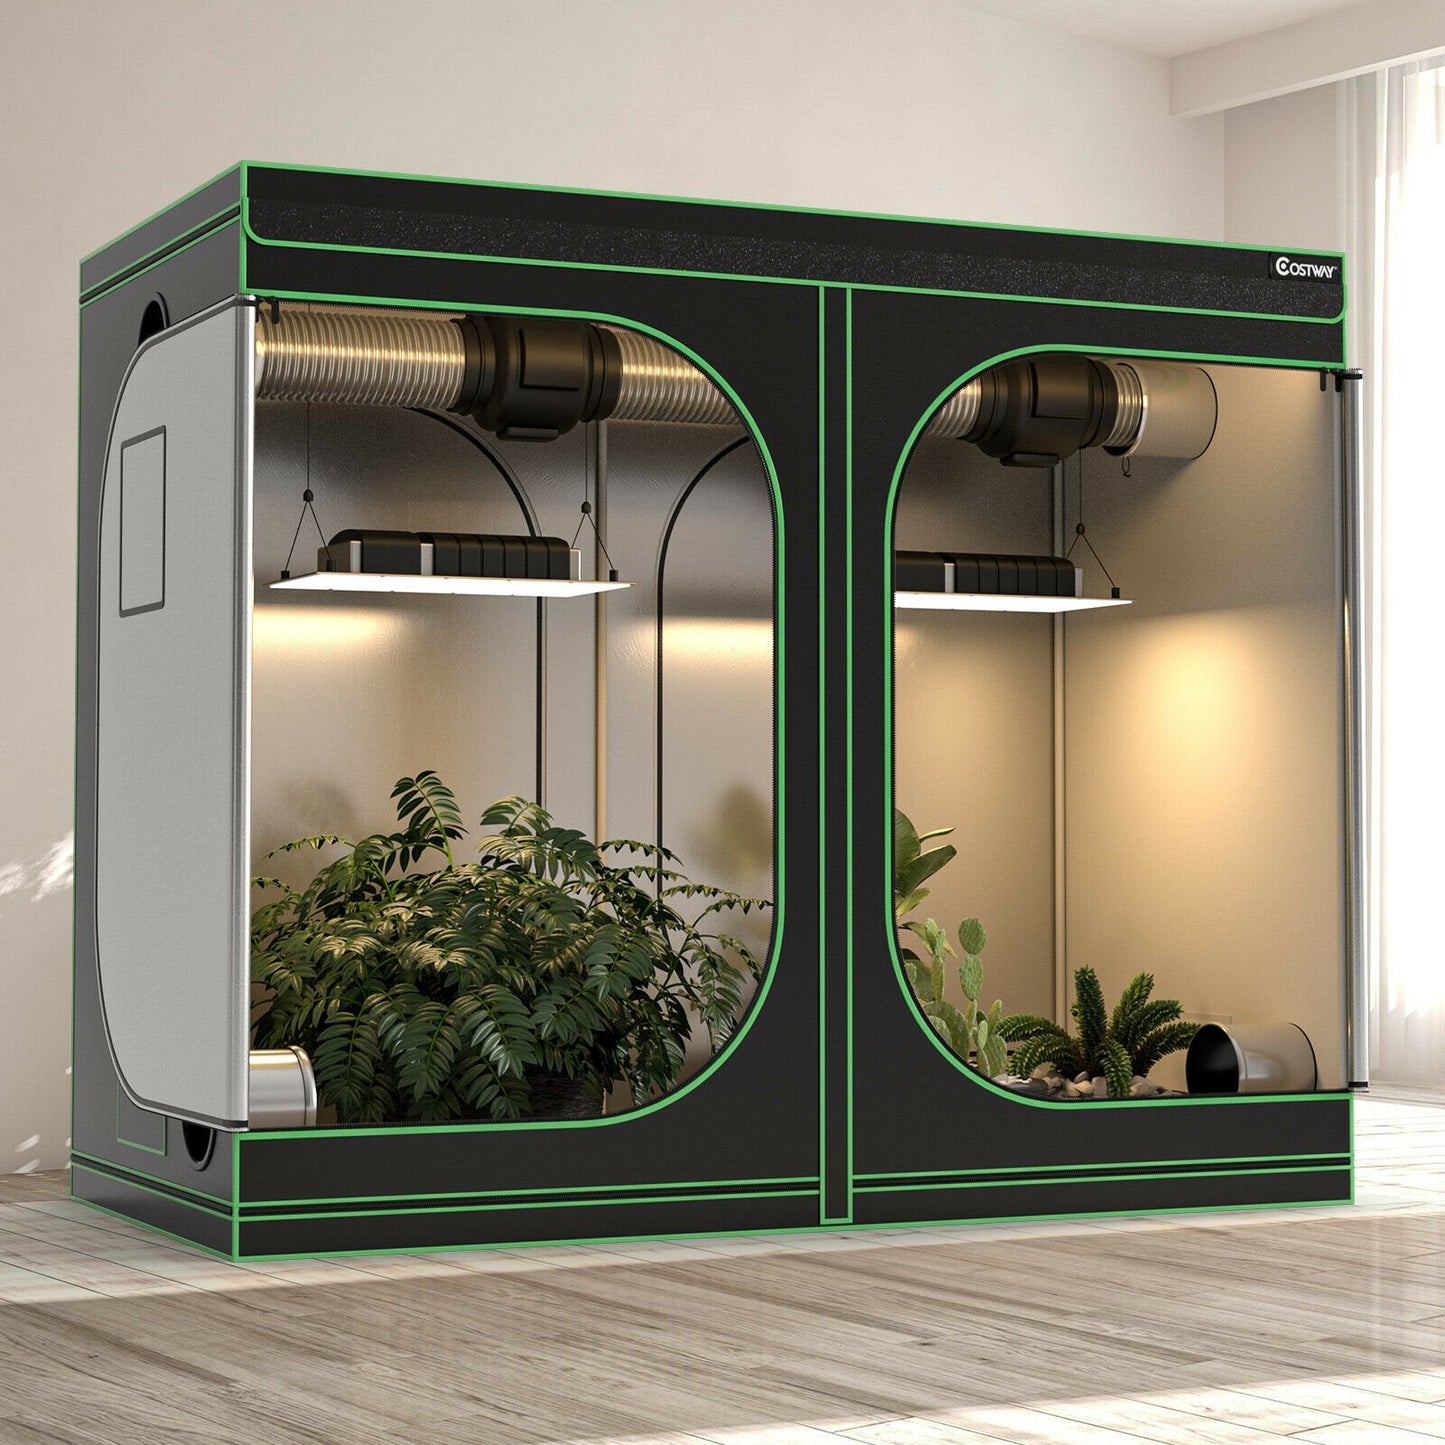 4 x 8 Grow Tent with Observation Window for Indoor Plant Growing, Black